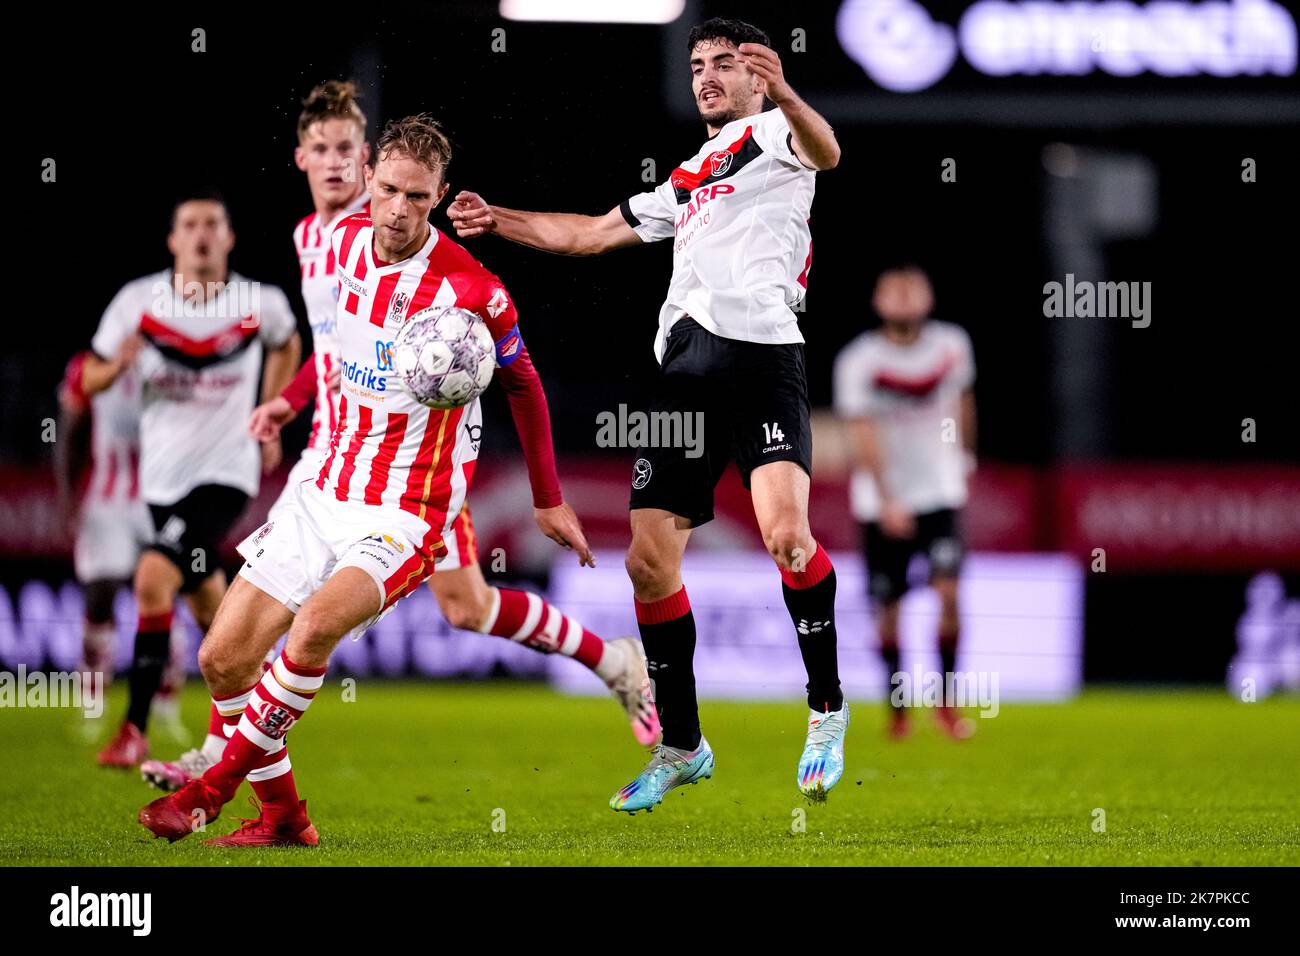 ALMERE, NETHERLANDS - OCTOBER 18: Rick Stuy van den Herik of TOP Oss, Jose Pascual of Almere City FC during the Dutch TOTO KNVB Cup match between Almere City FC and TOP Oss at Yanmar Stadion on October 18, 2022 in Almere, Netherlands (Photo by Patrick Goosen/Orange Pictures) Stock Photo